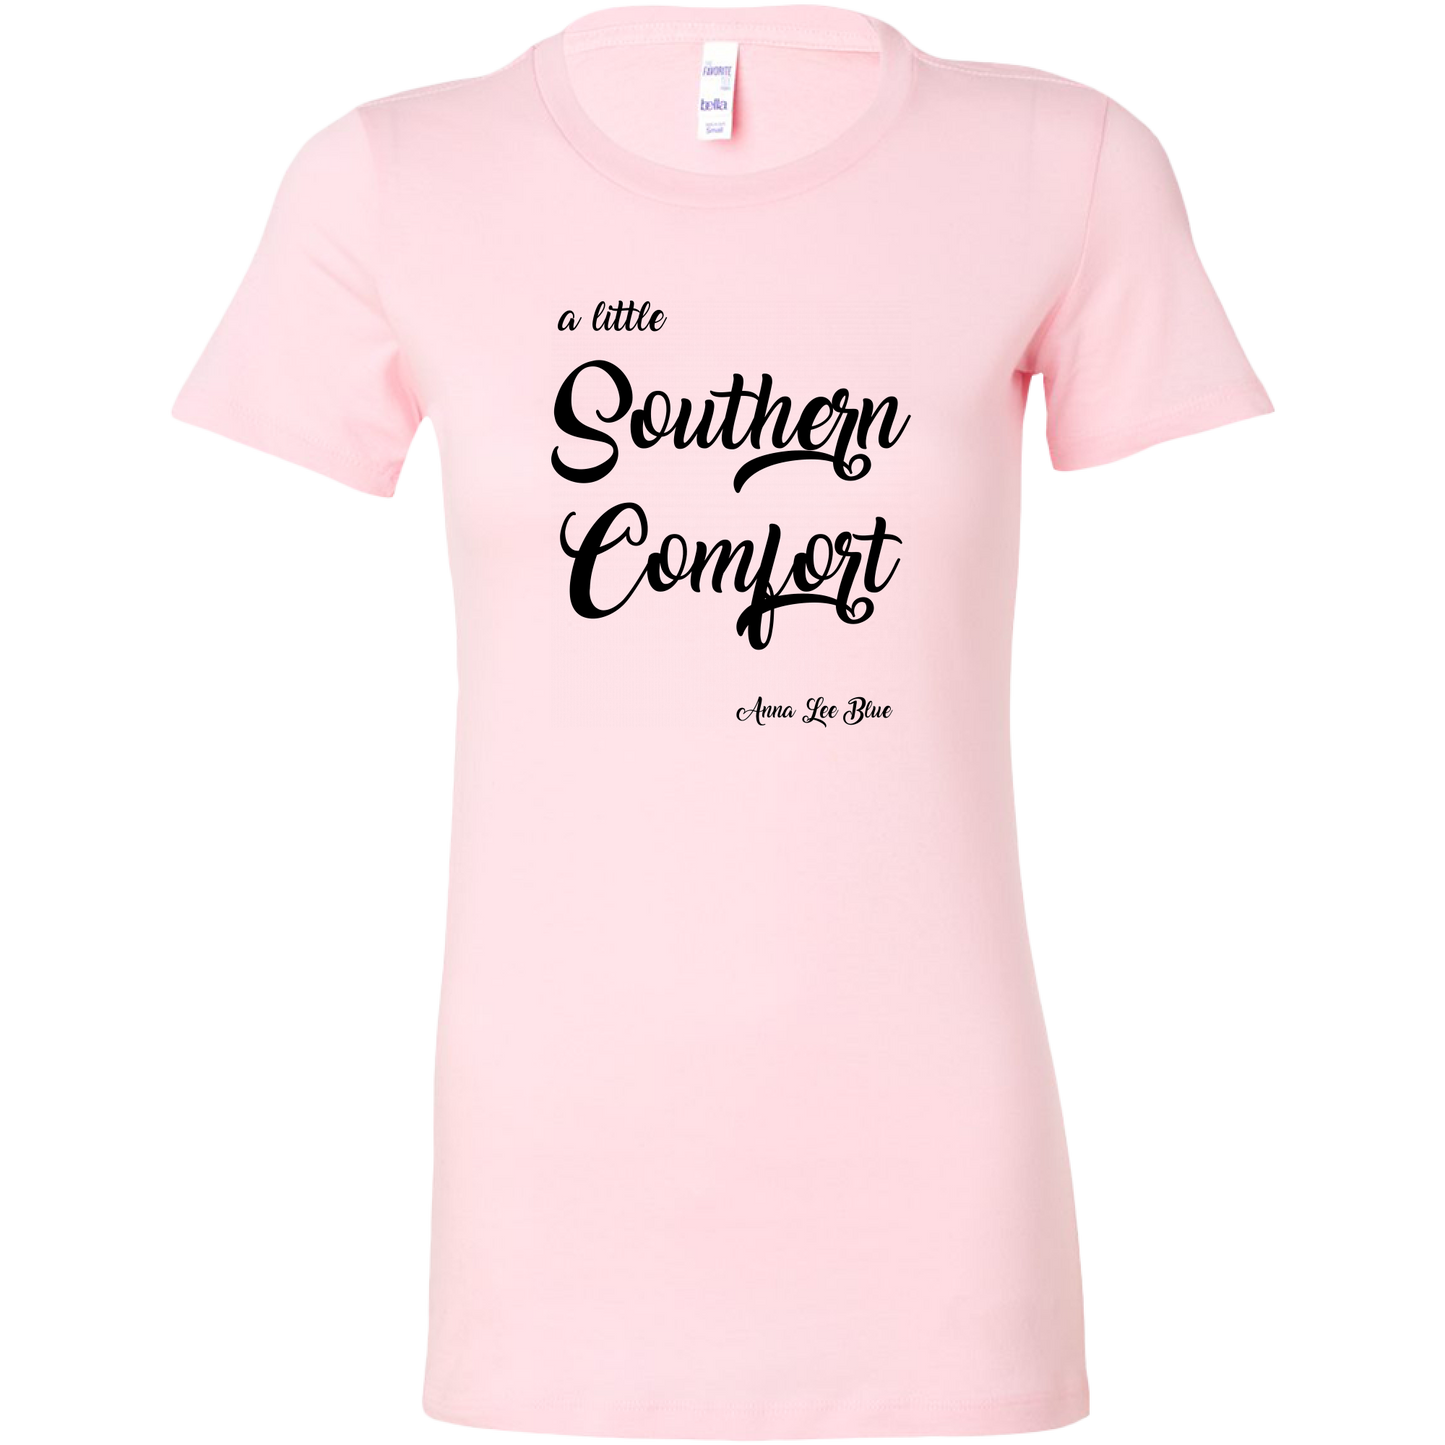 Sugar, Spice, and Southern Comfort Best Friend T ShirtsClassically Styled